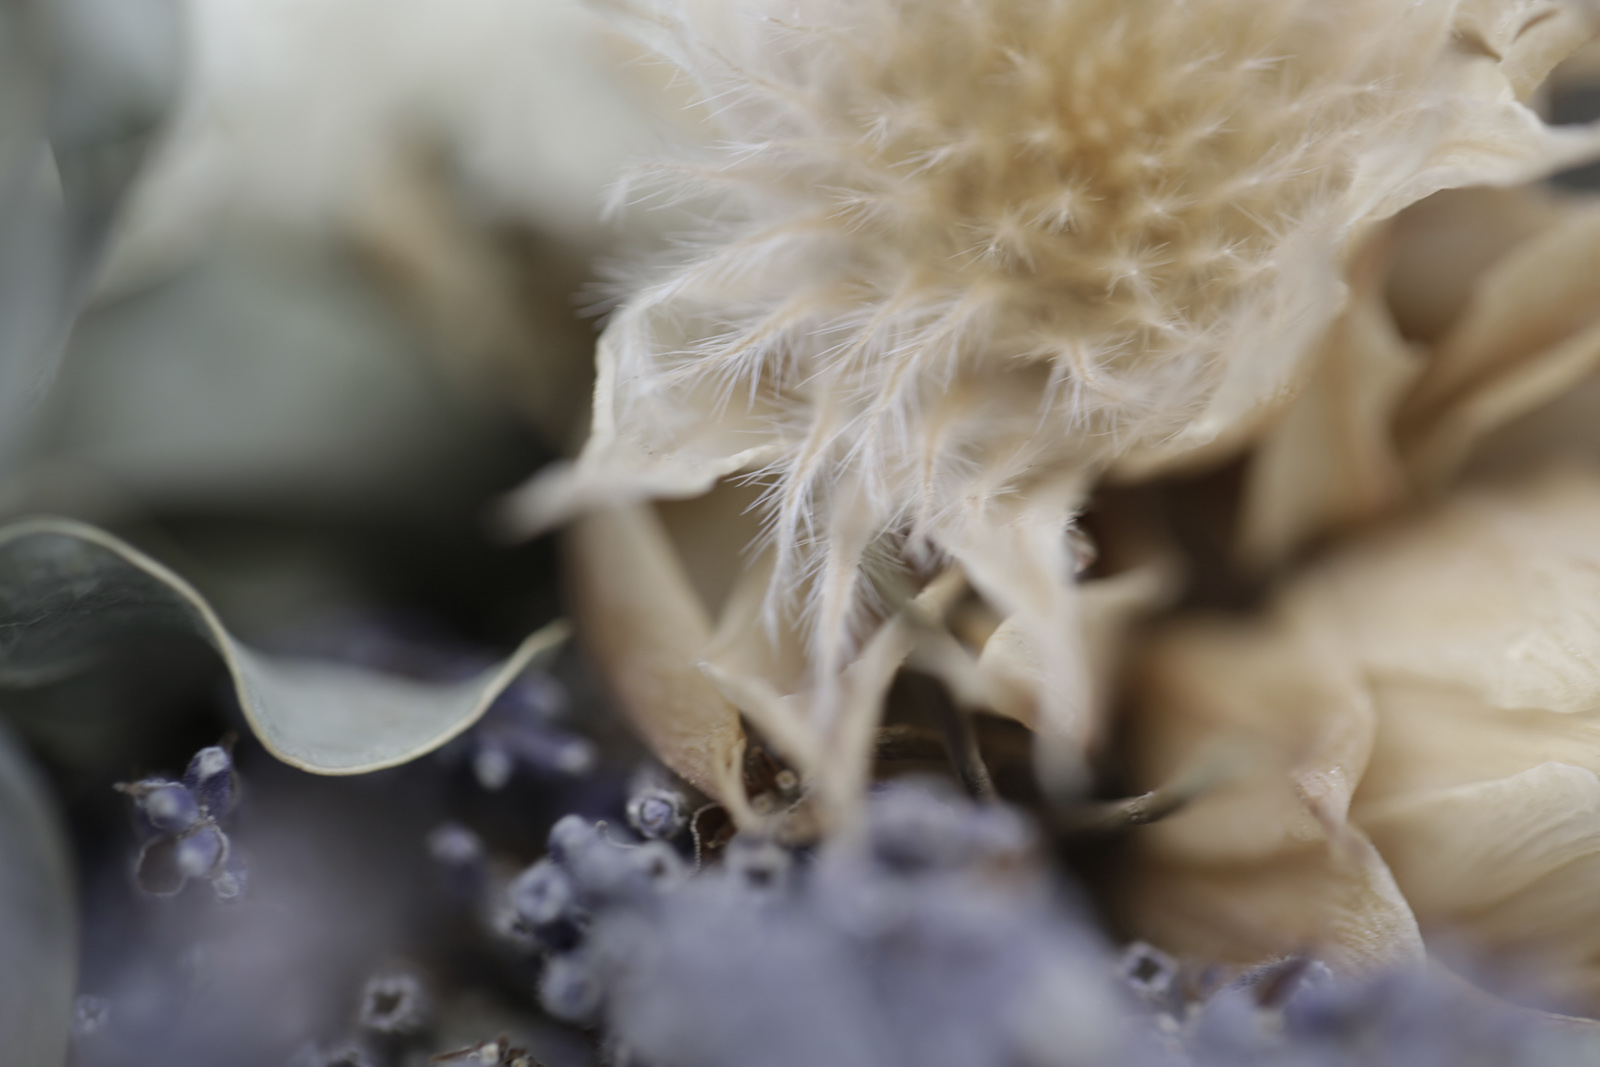 a picture of dried flowers shot by Namiko Kitaura